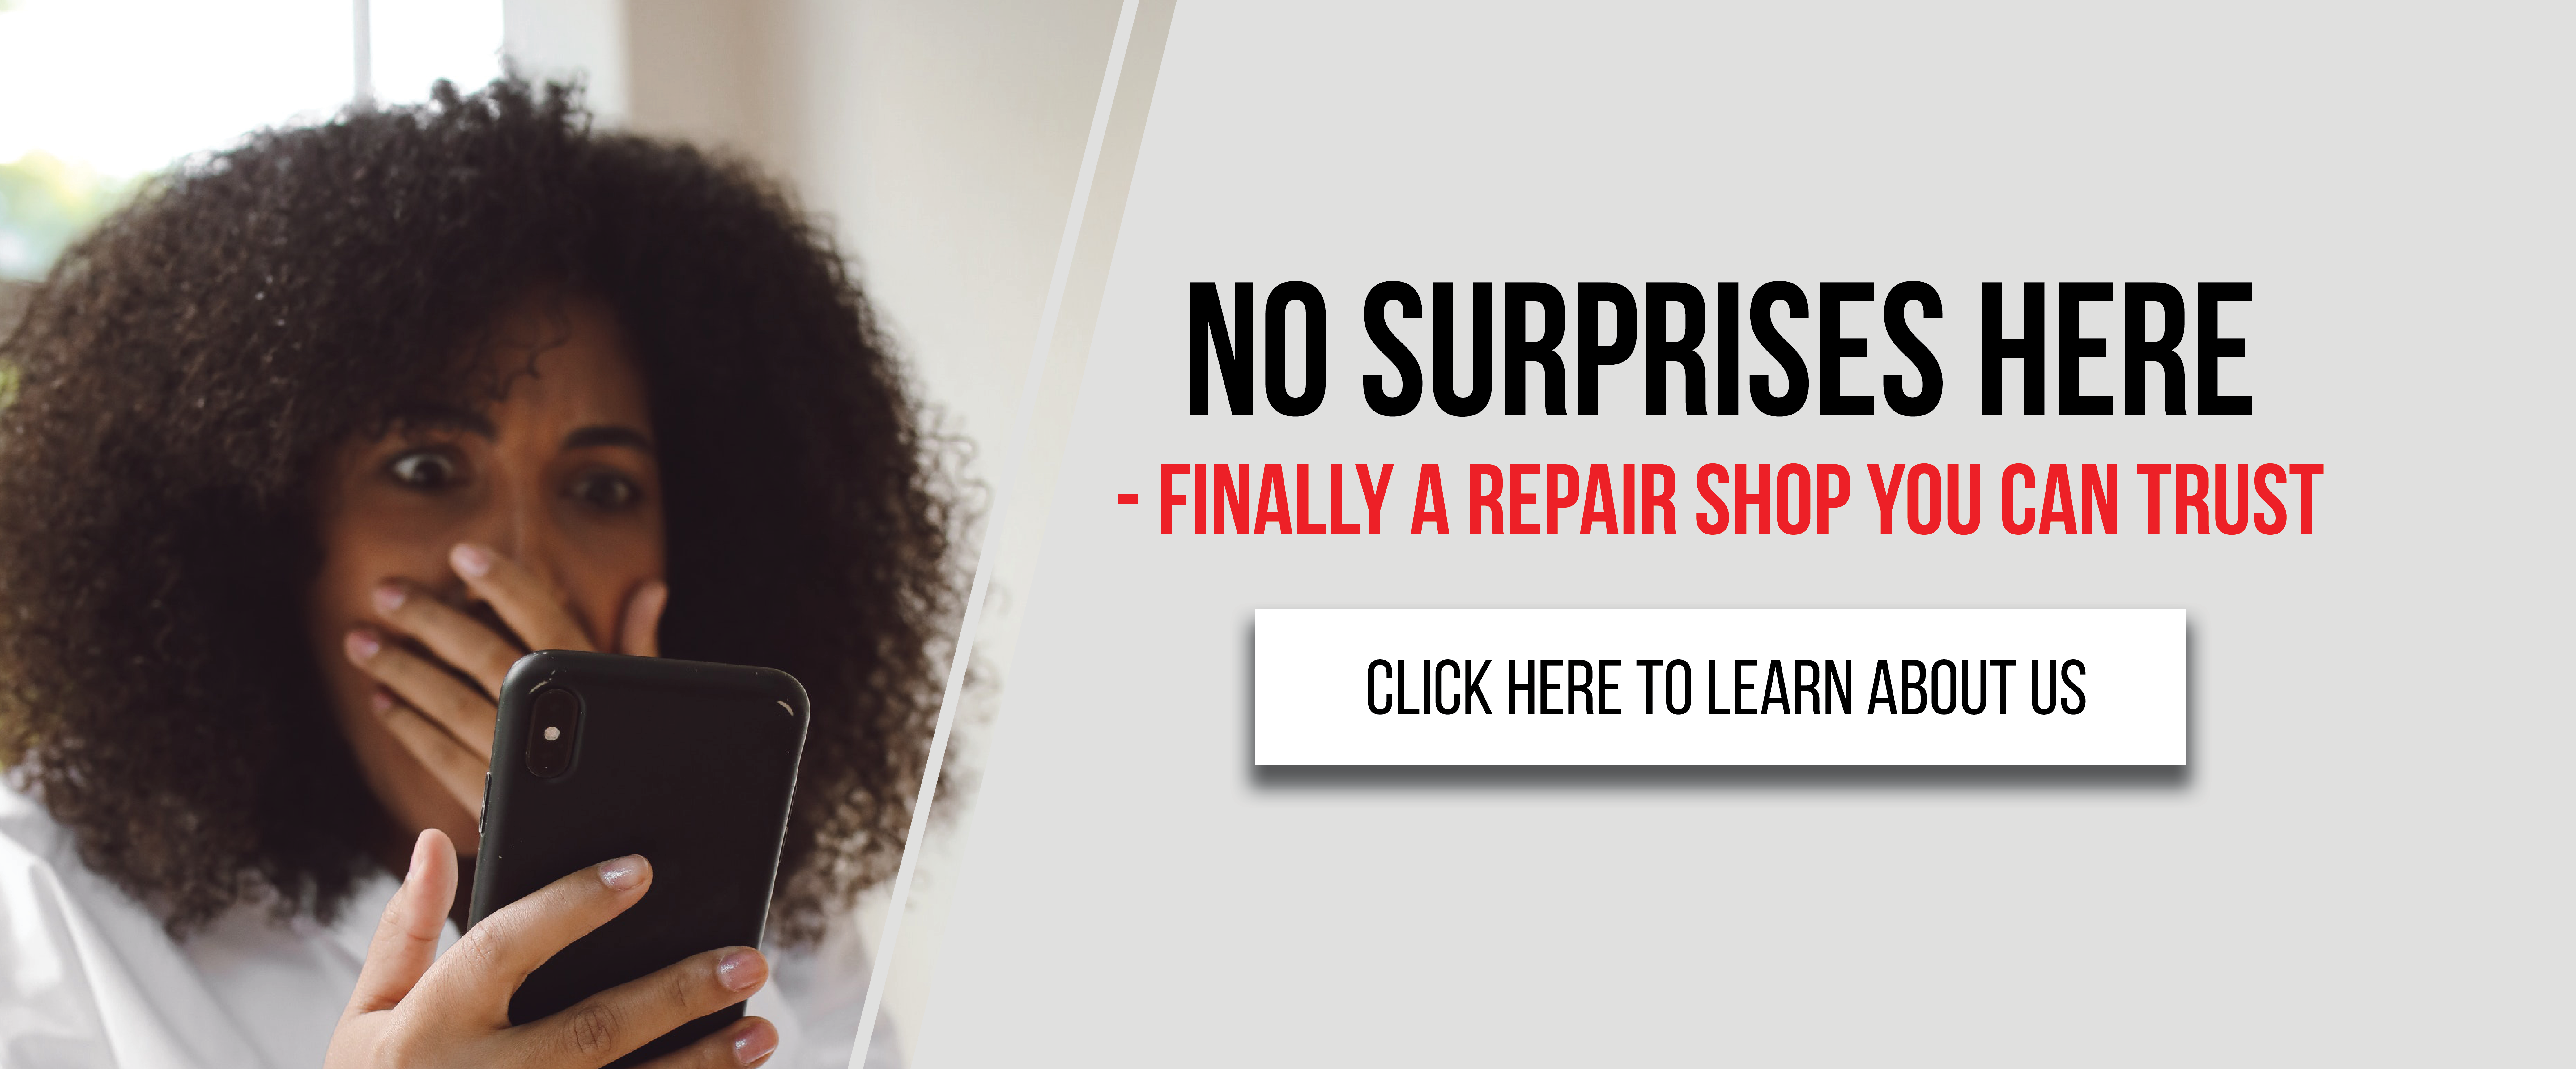 Finally a repair shop you can trust - click here to learn more about us